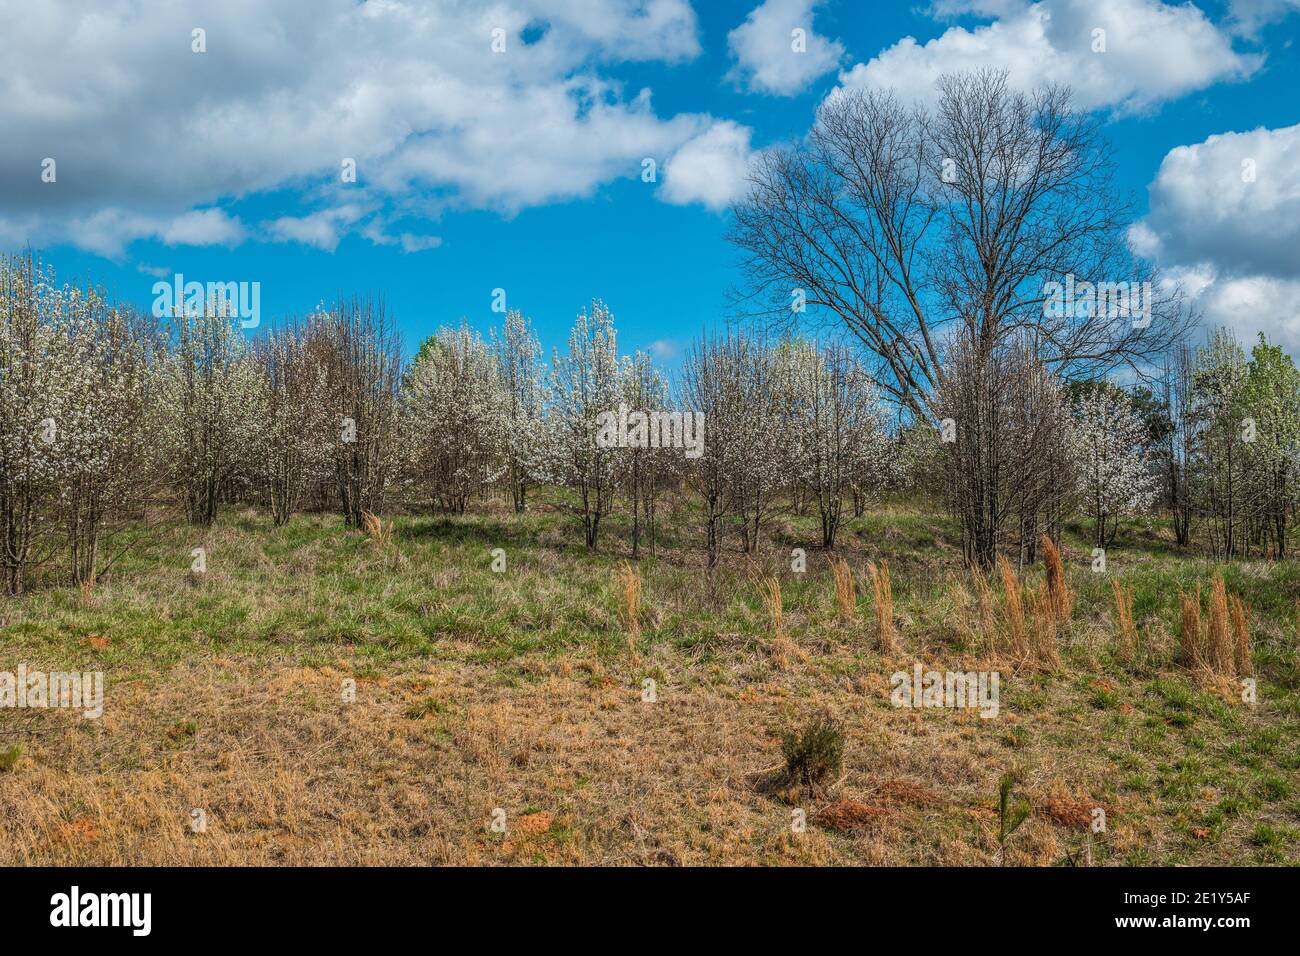 An open field with white flowering trees in a row blooming in early spring surrounded by tall grasses on a sunny day Stock Photo